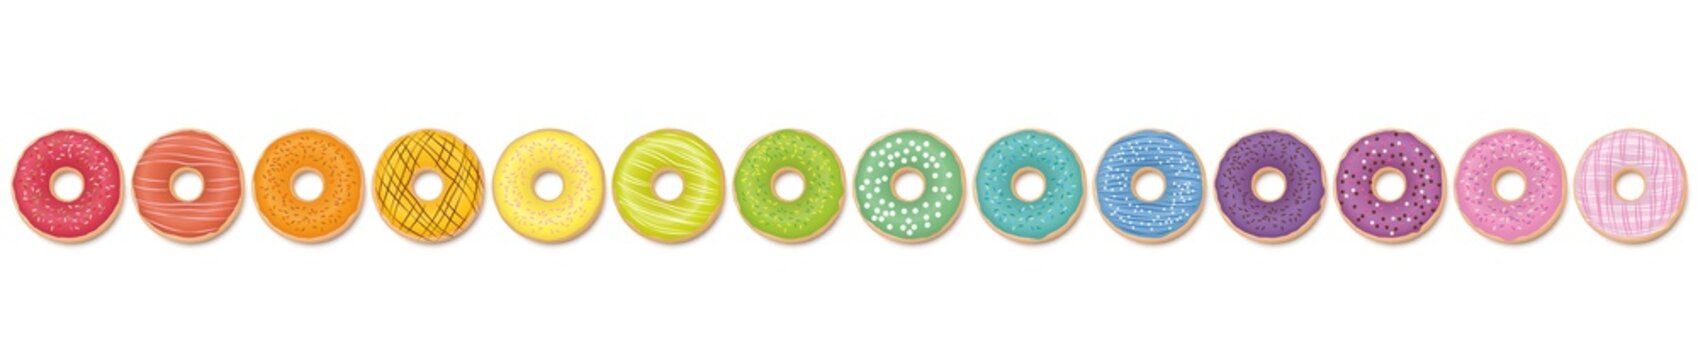 Donut pattern. Rainbow colored donuts in a line. Isolated vector illustration on white background.